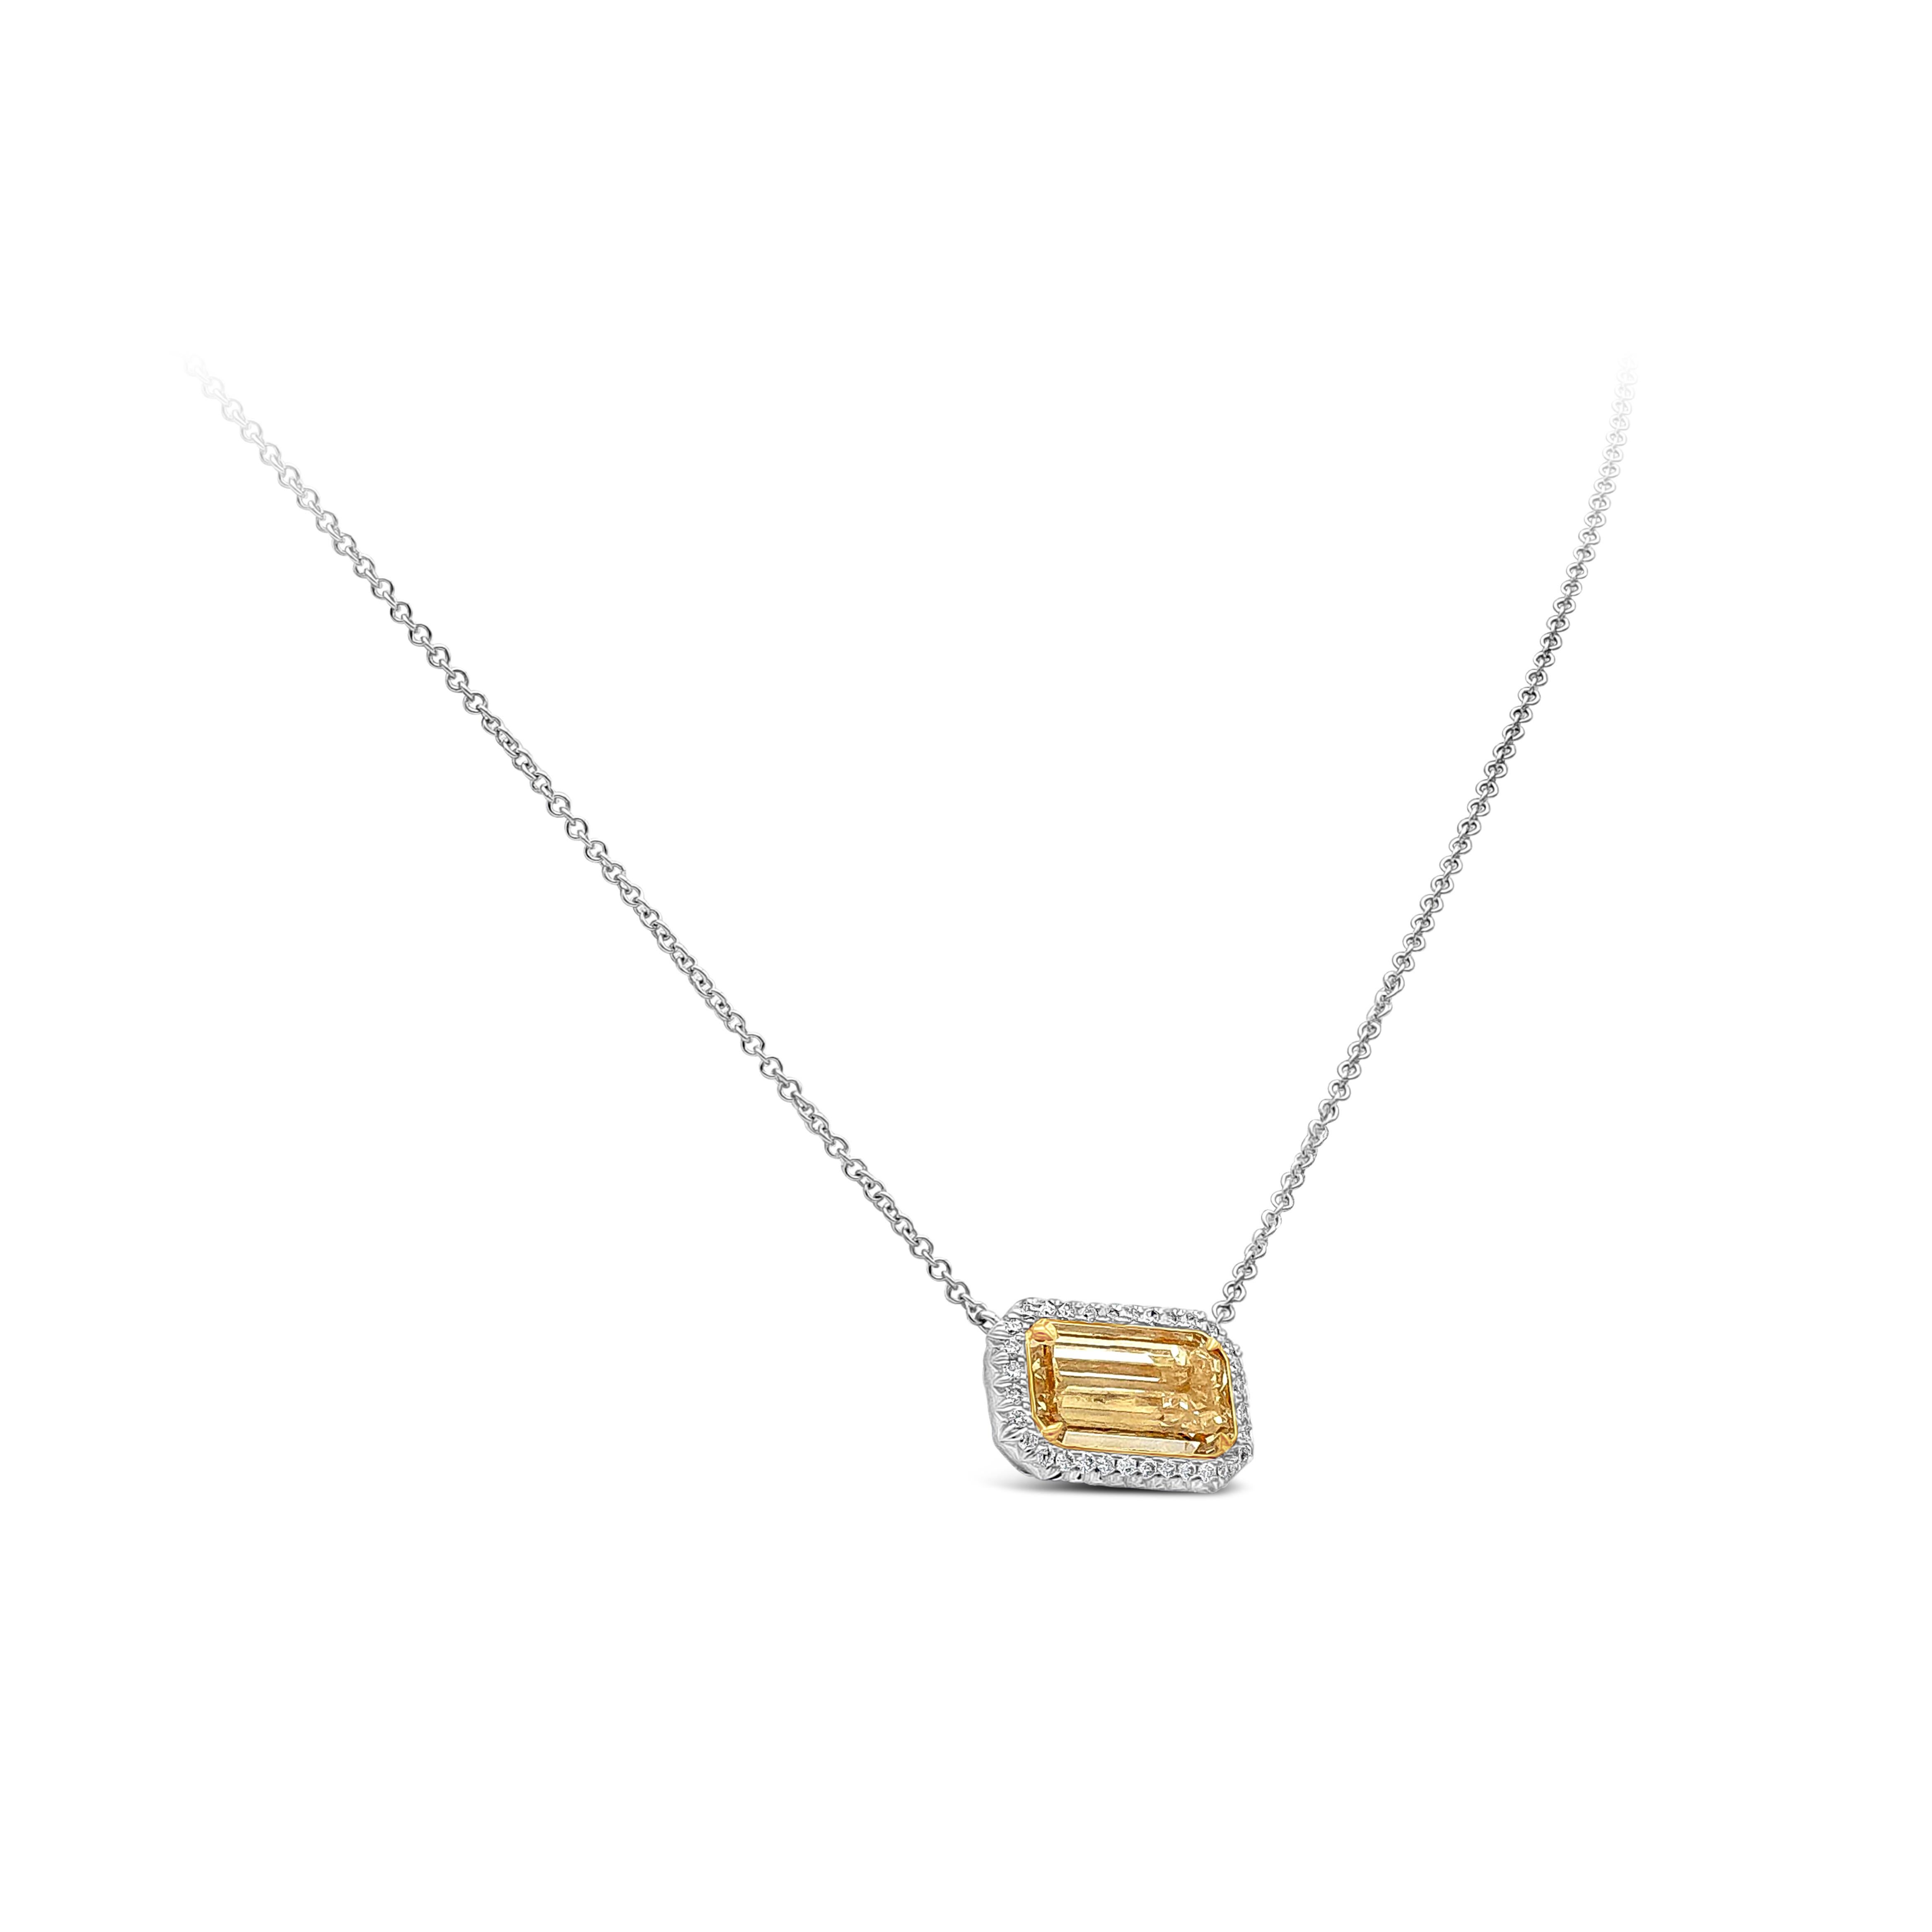 A beautiful pendant necklace showcasing a 1.86 carats emerald cut diamond certified by GIA as W-X color and VS1 in clarity. Surrounded by a a row of round brilliant diamonds weighing 0.18 carats total, F color and VS in clarity. Suspended on an 18